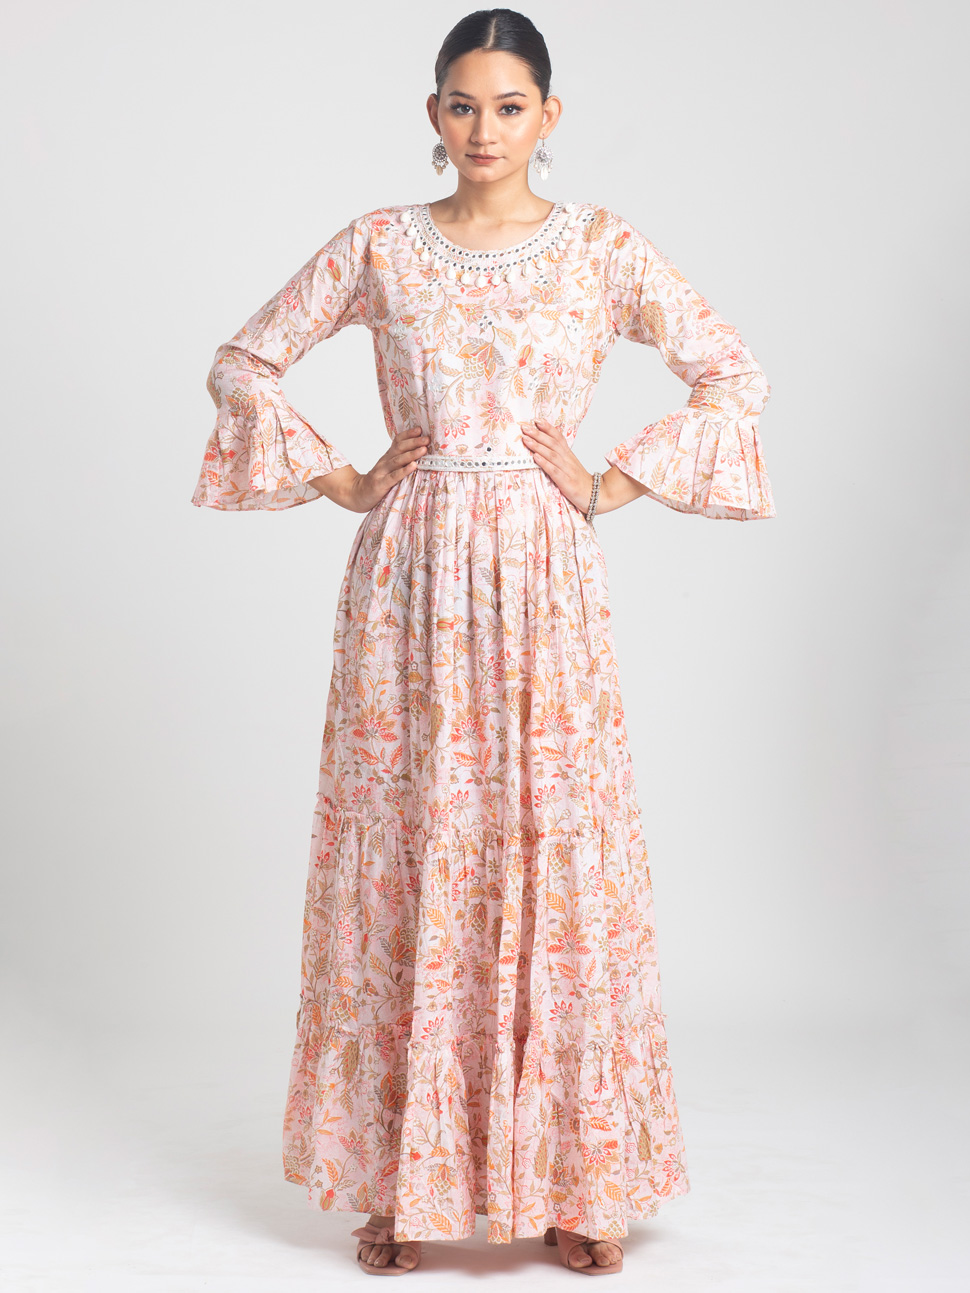 COCONUT BEIGE LIBERTY FLORAL PRINT GOWN